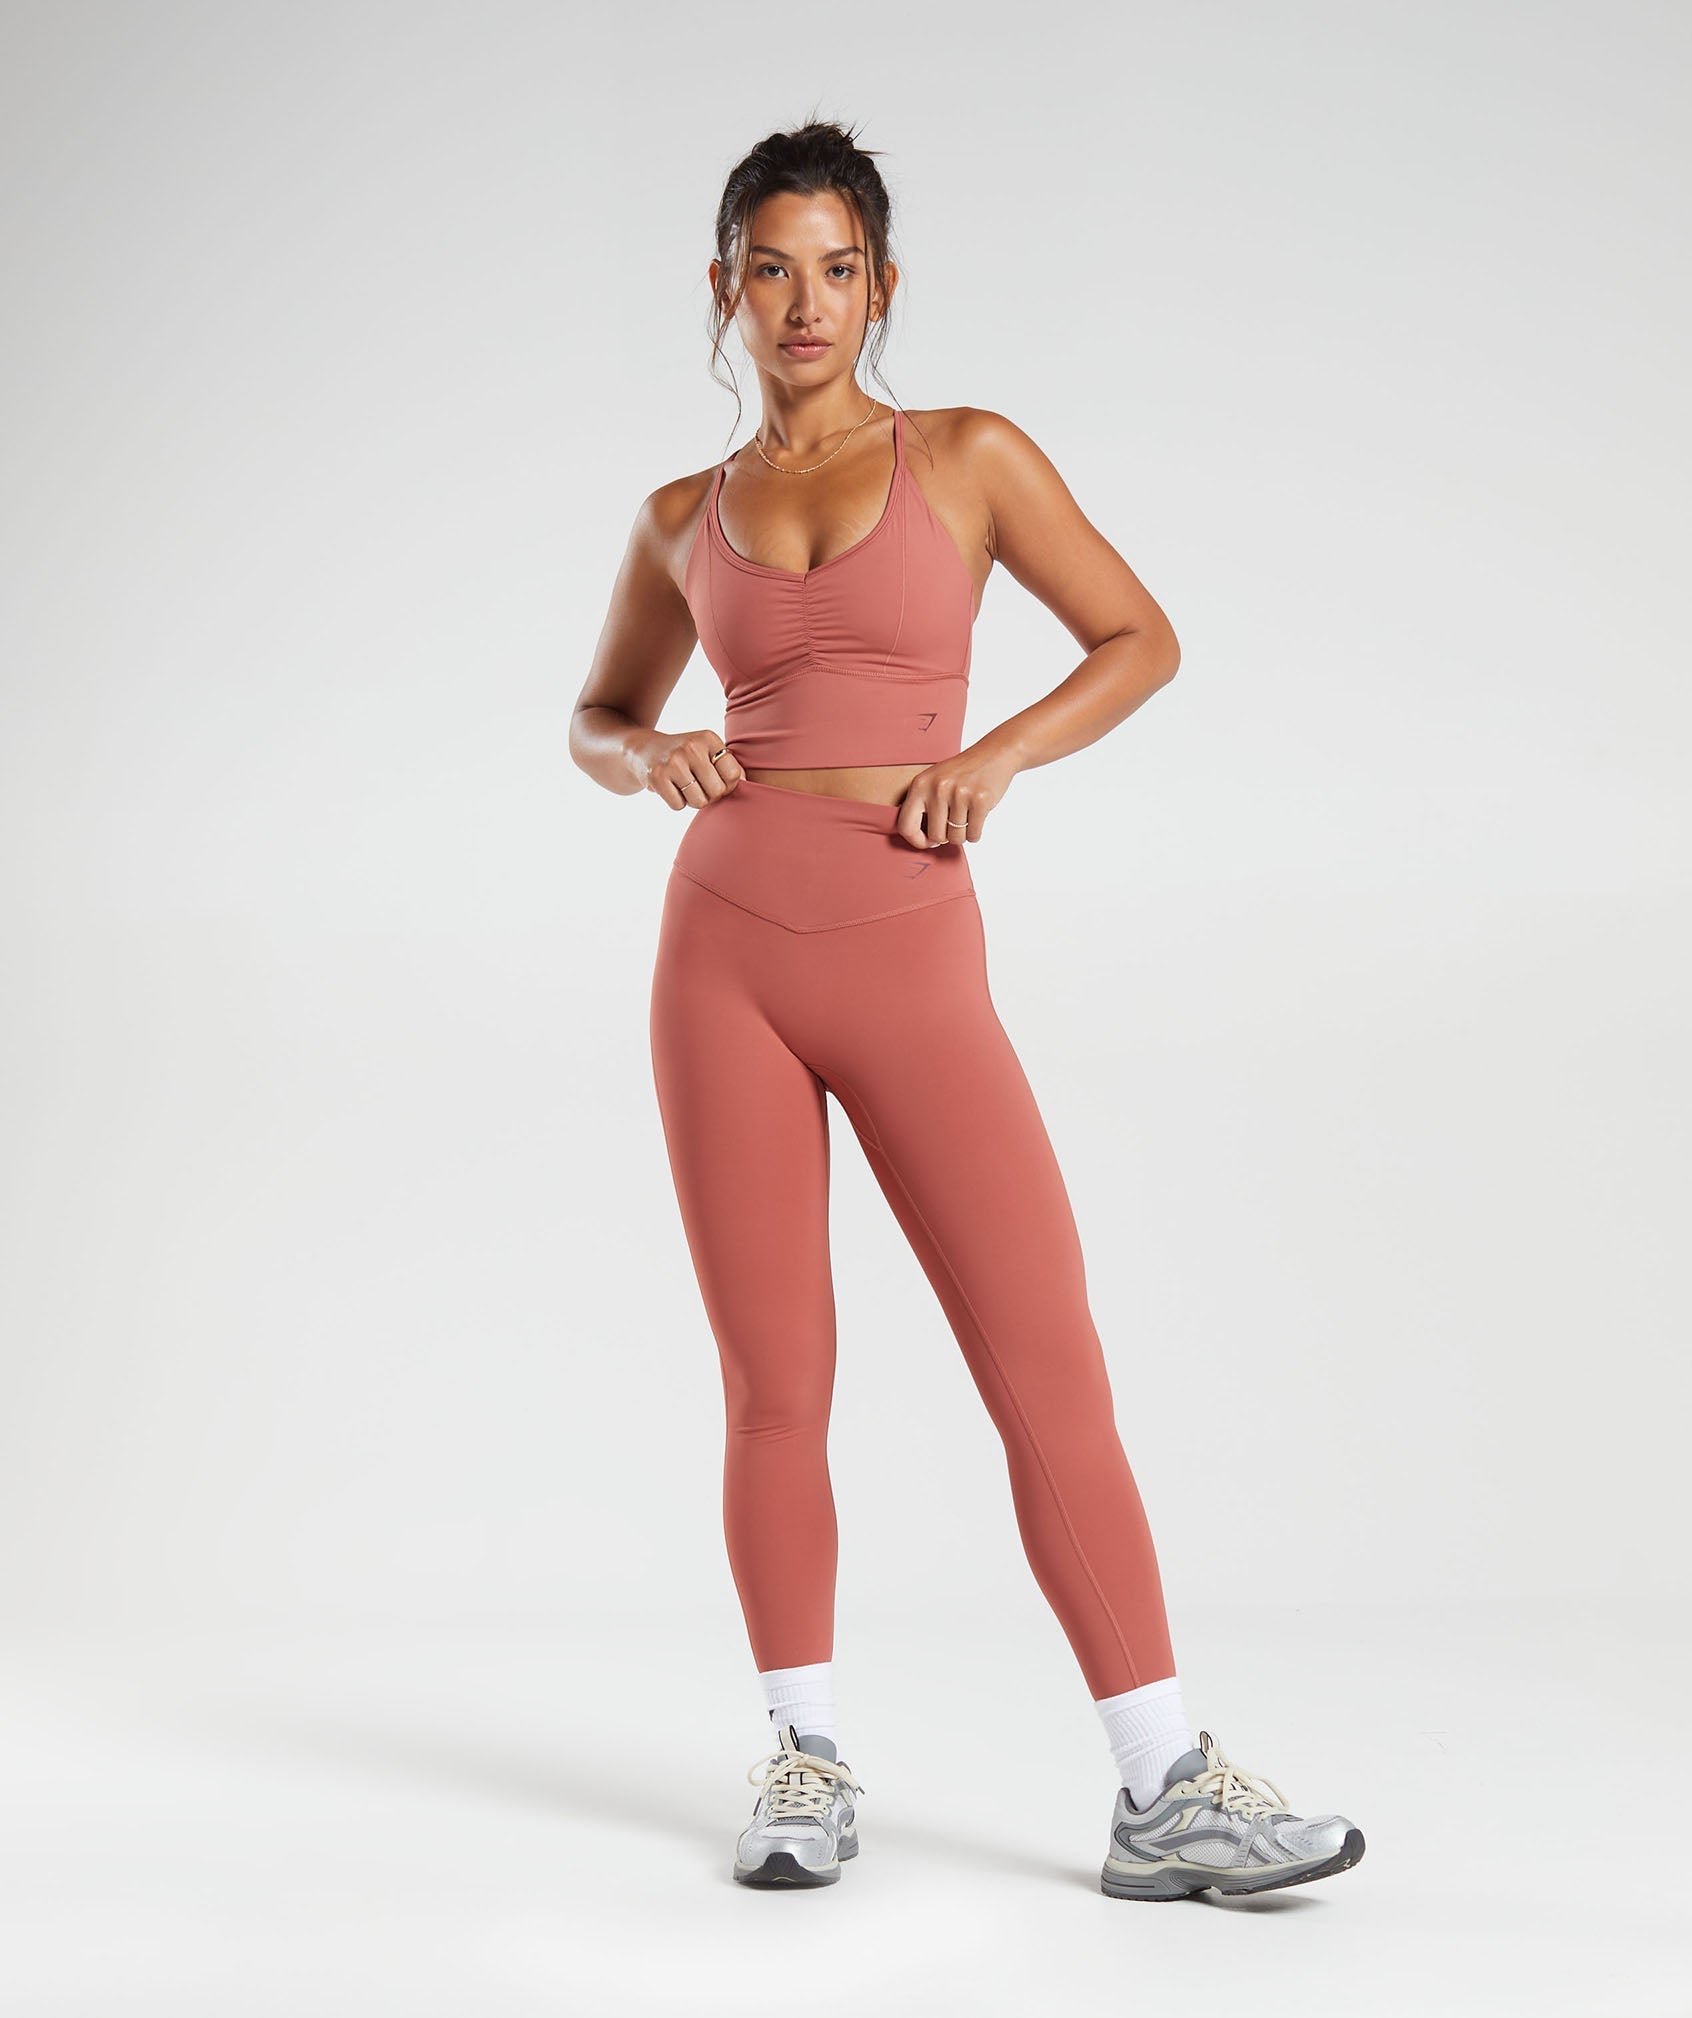 Discover the Ultimate Sportswear: FeatherFit Leggings